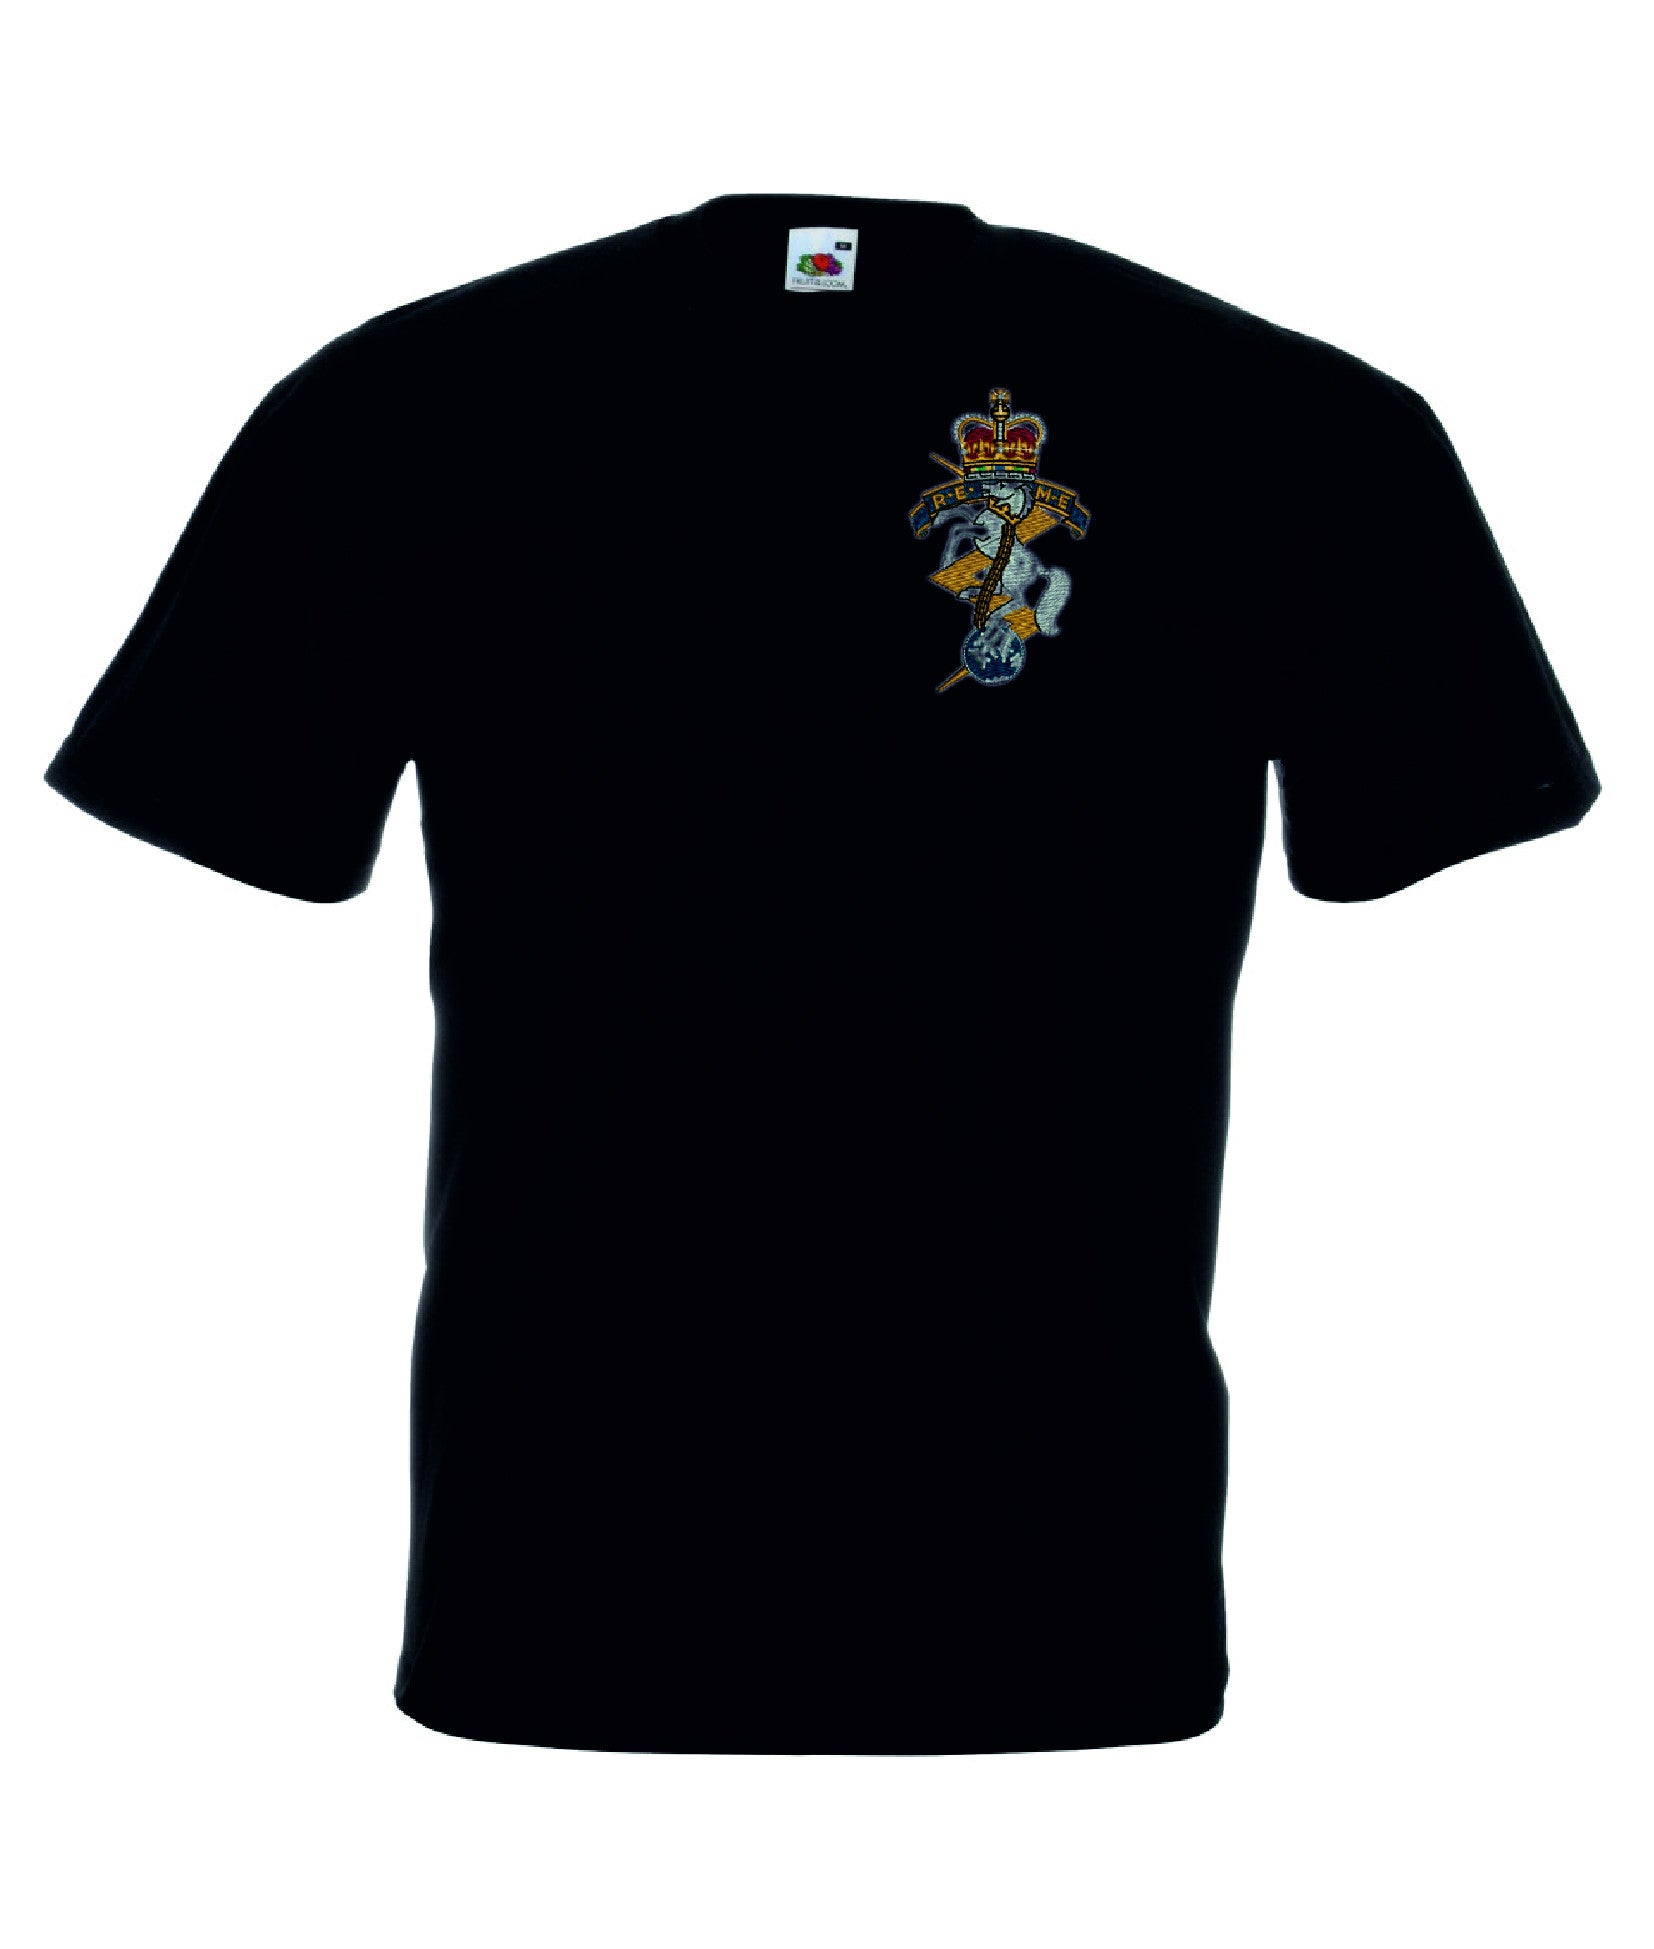 REME T Shirt (Royal Electrical & Mechanical Engineers)